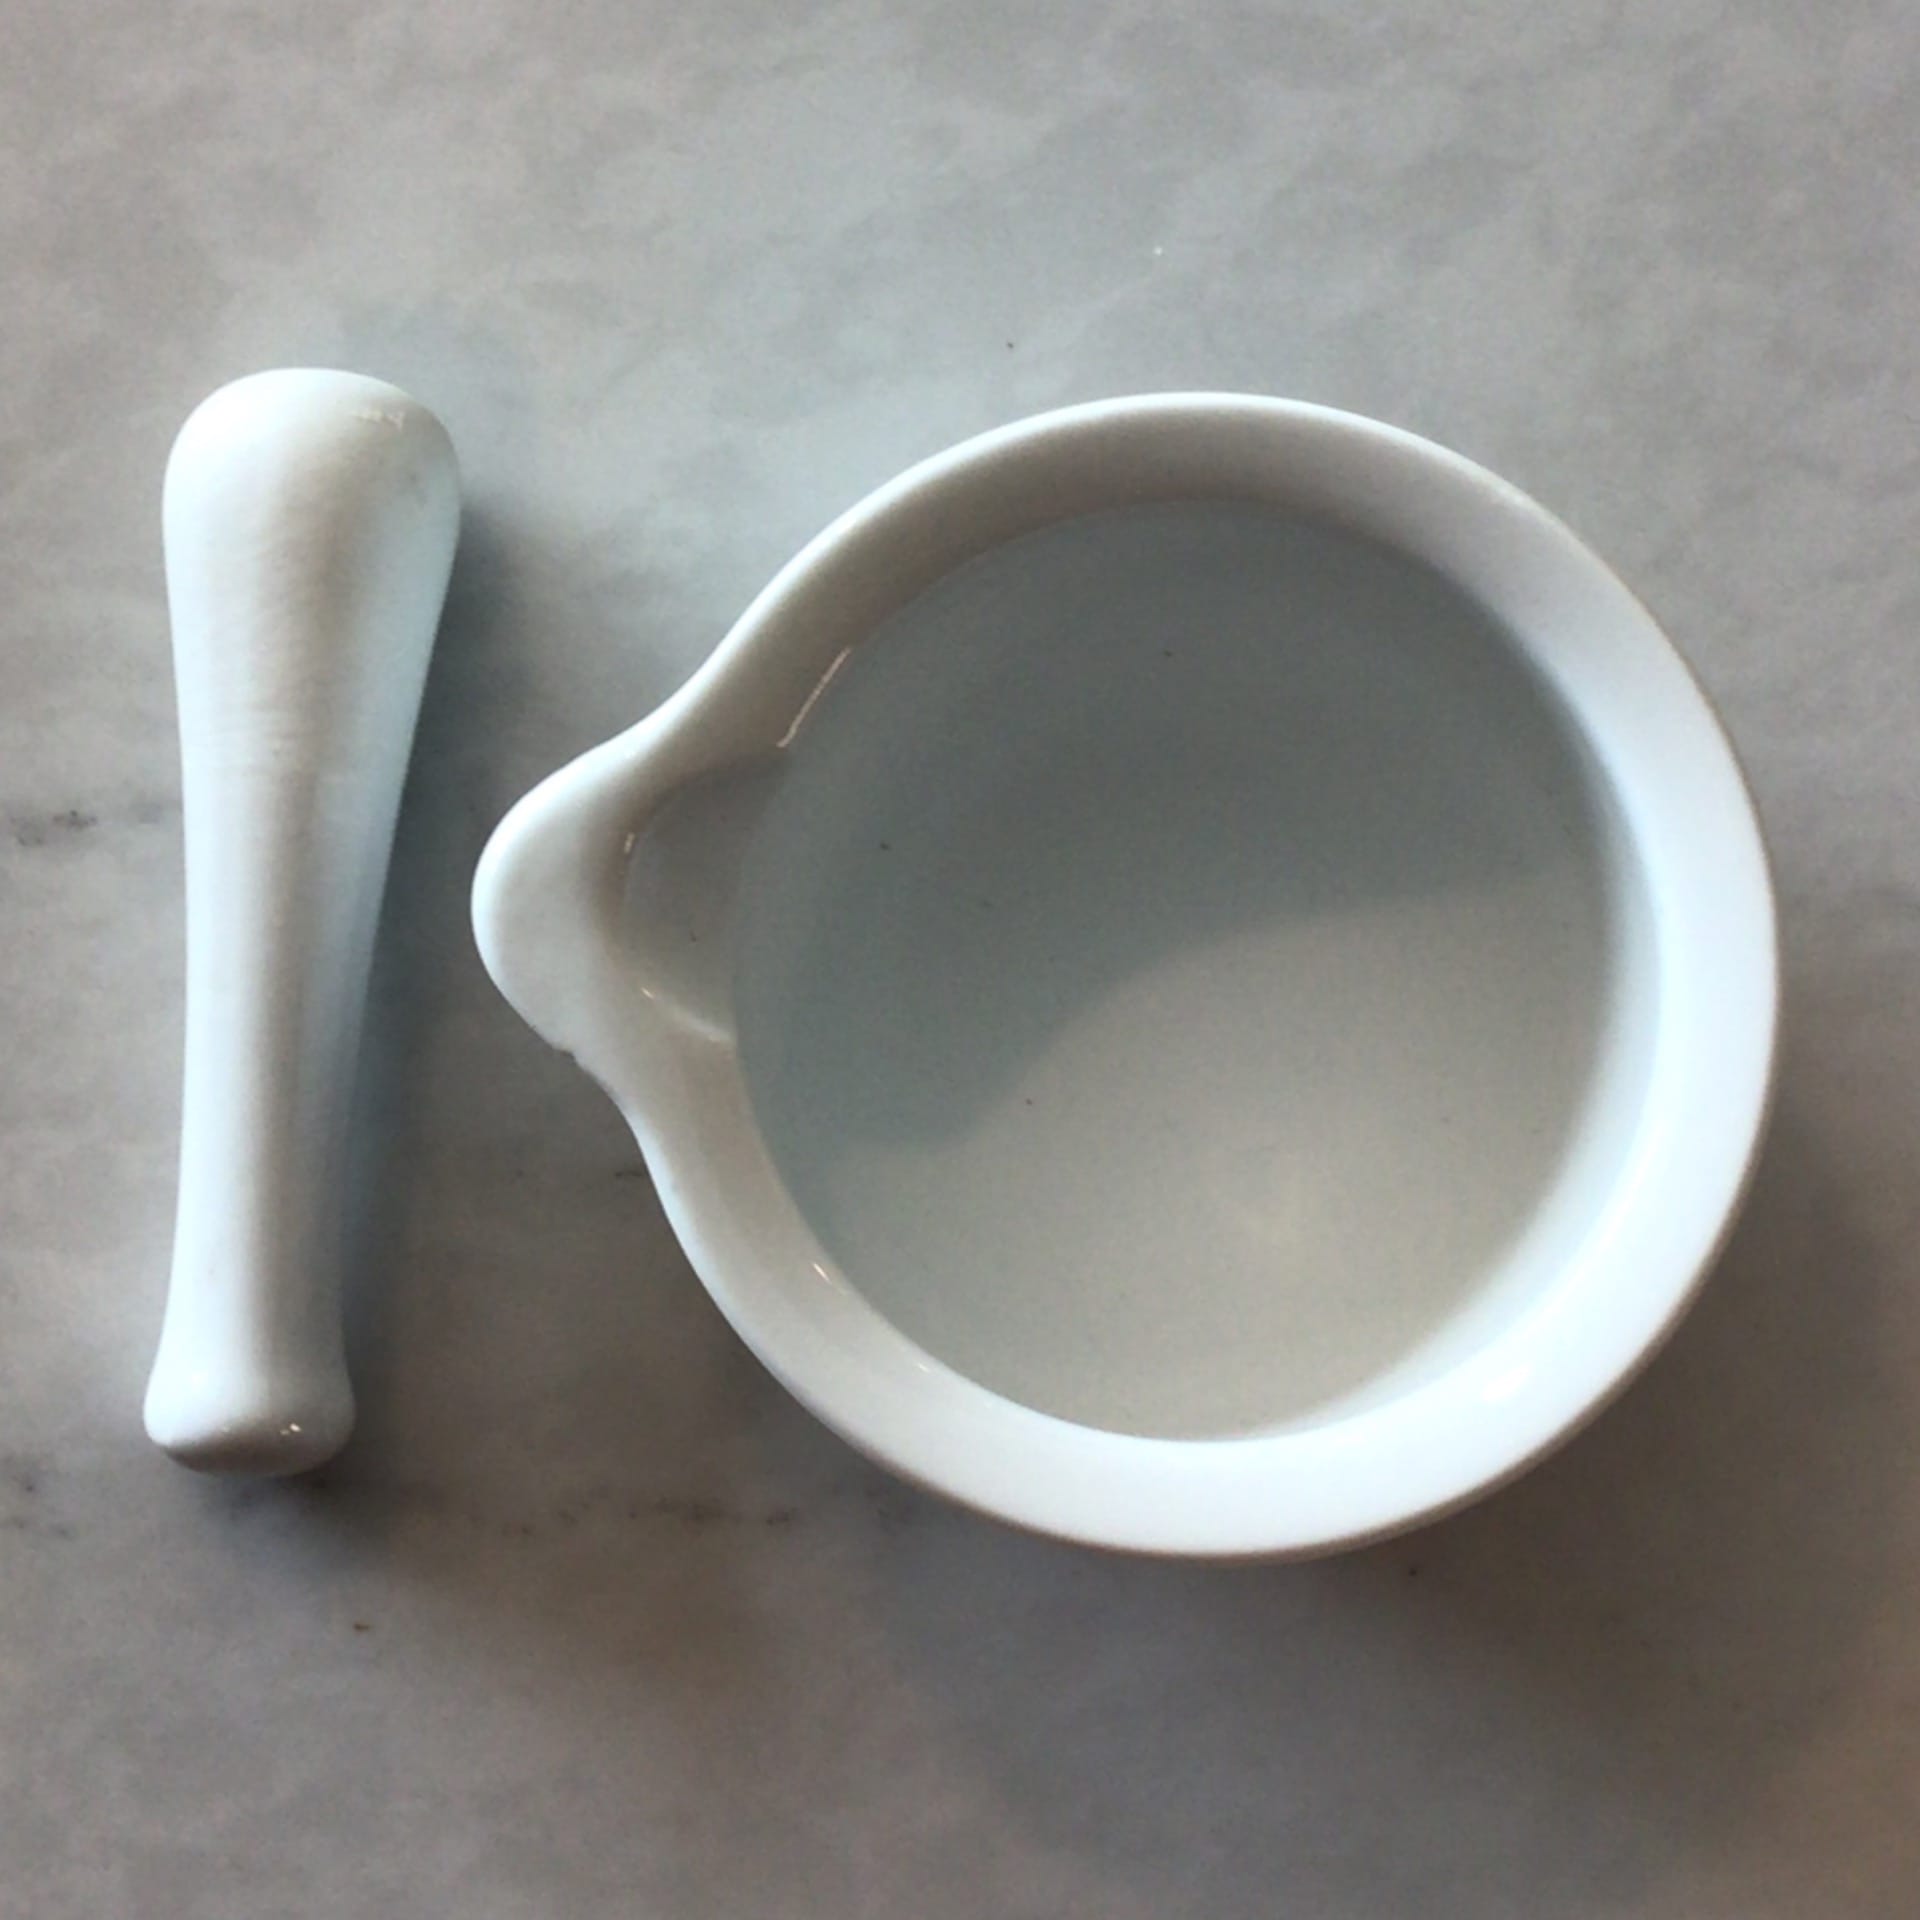 sold out white porcelain mortar and pestle 125 cup